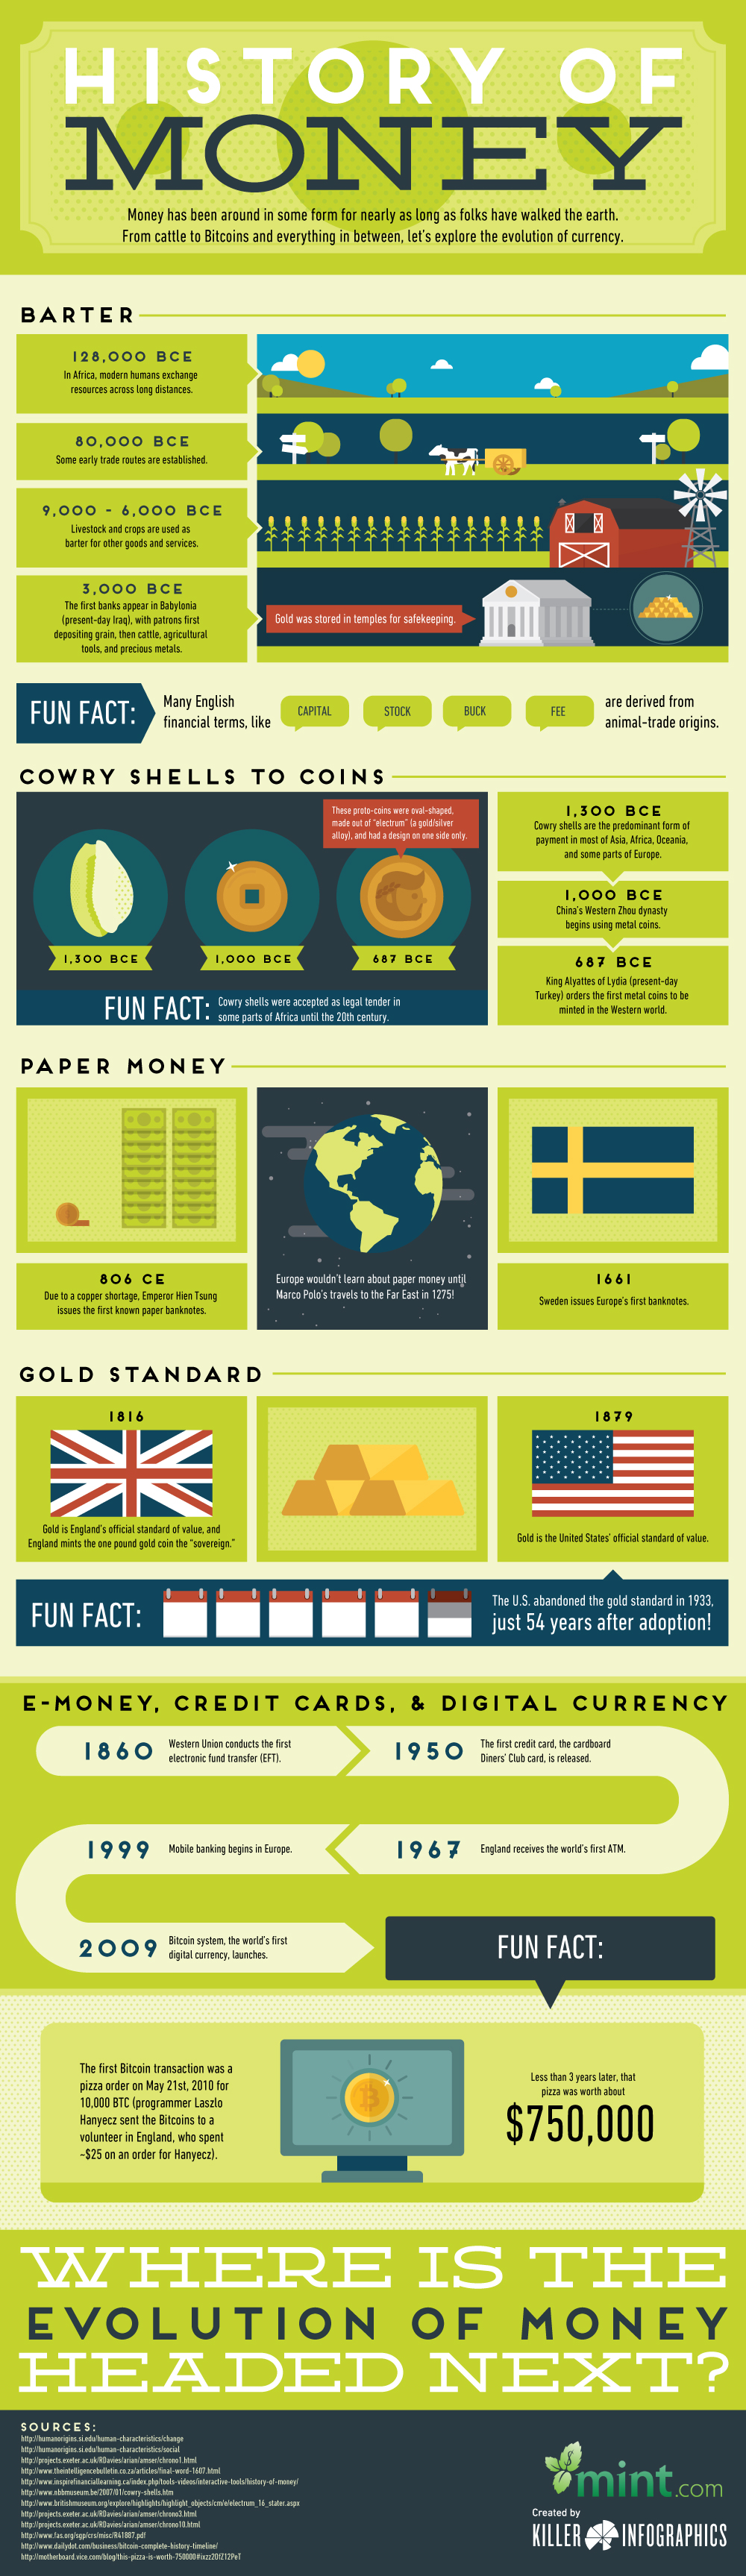 The History of Money Explained in One Infographic